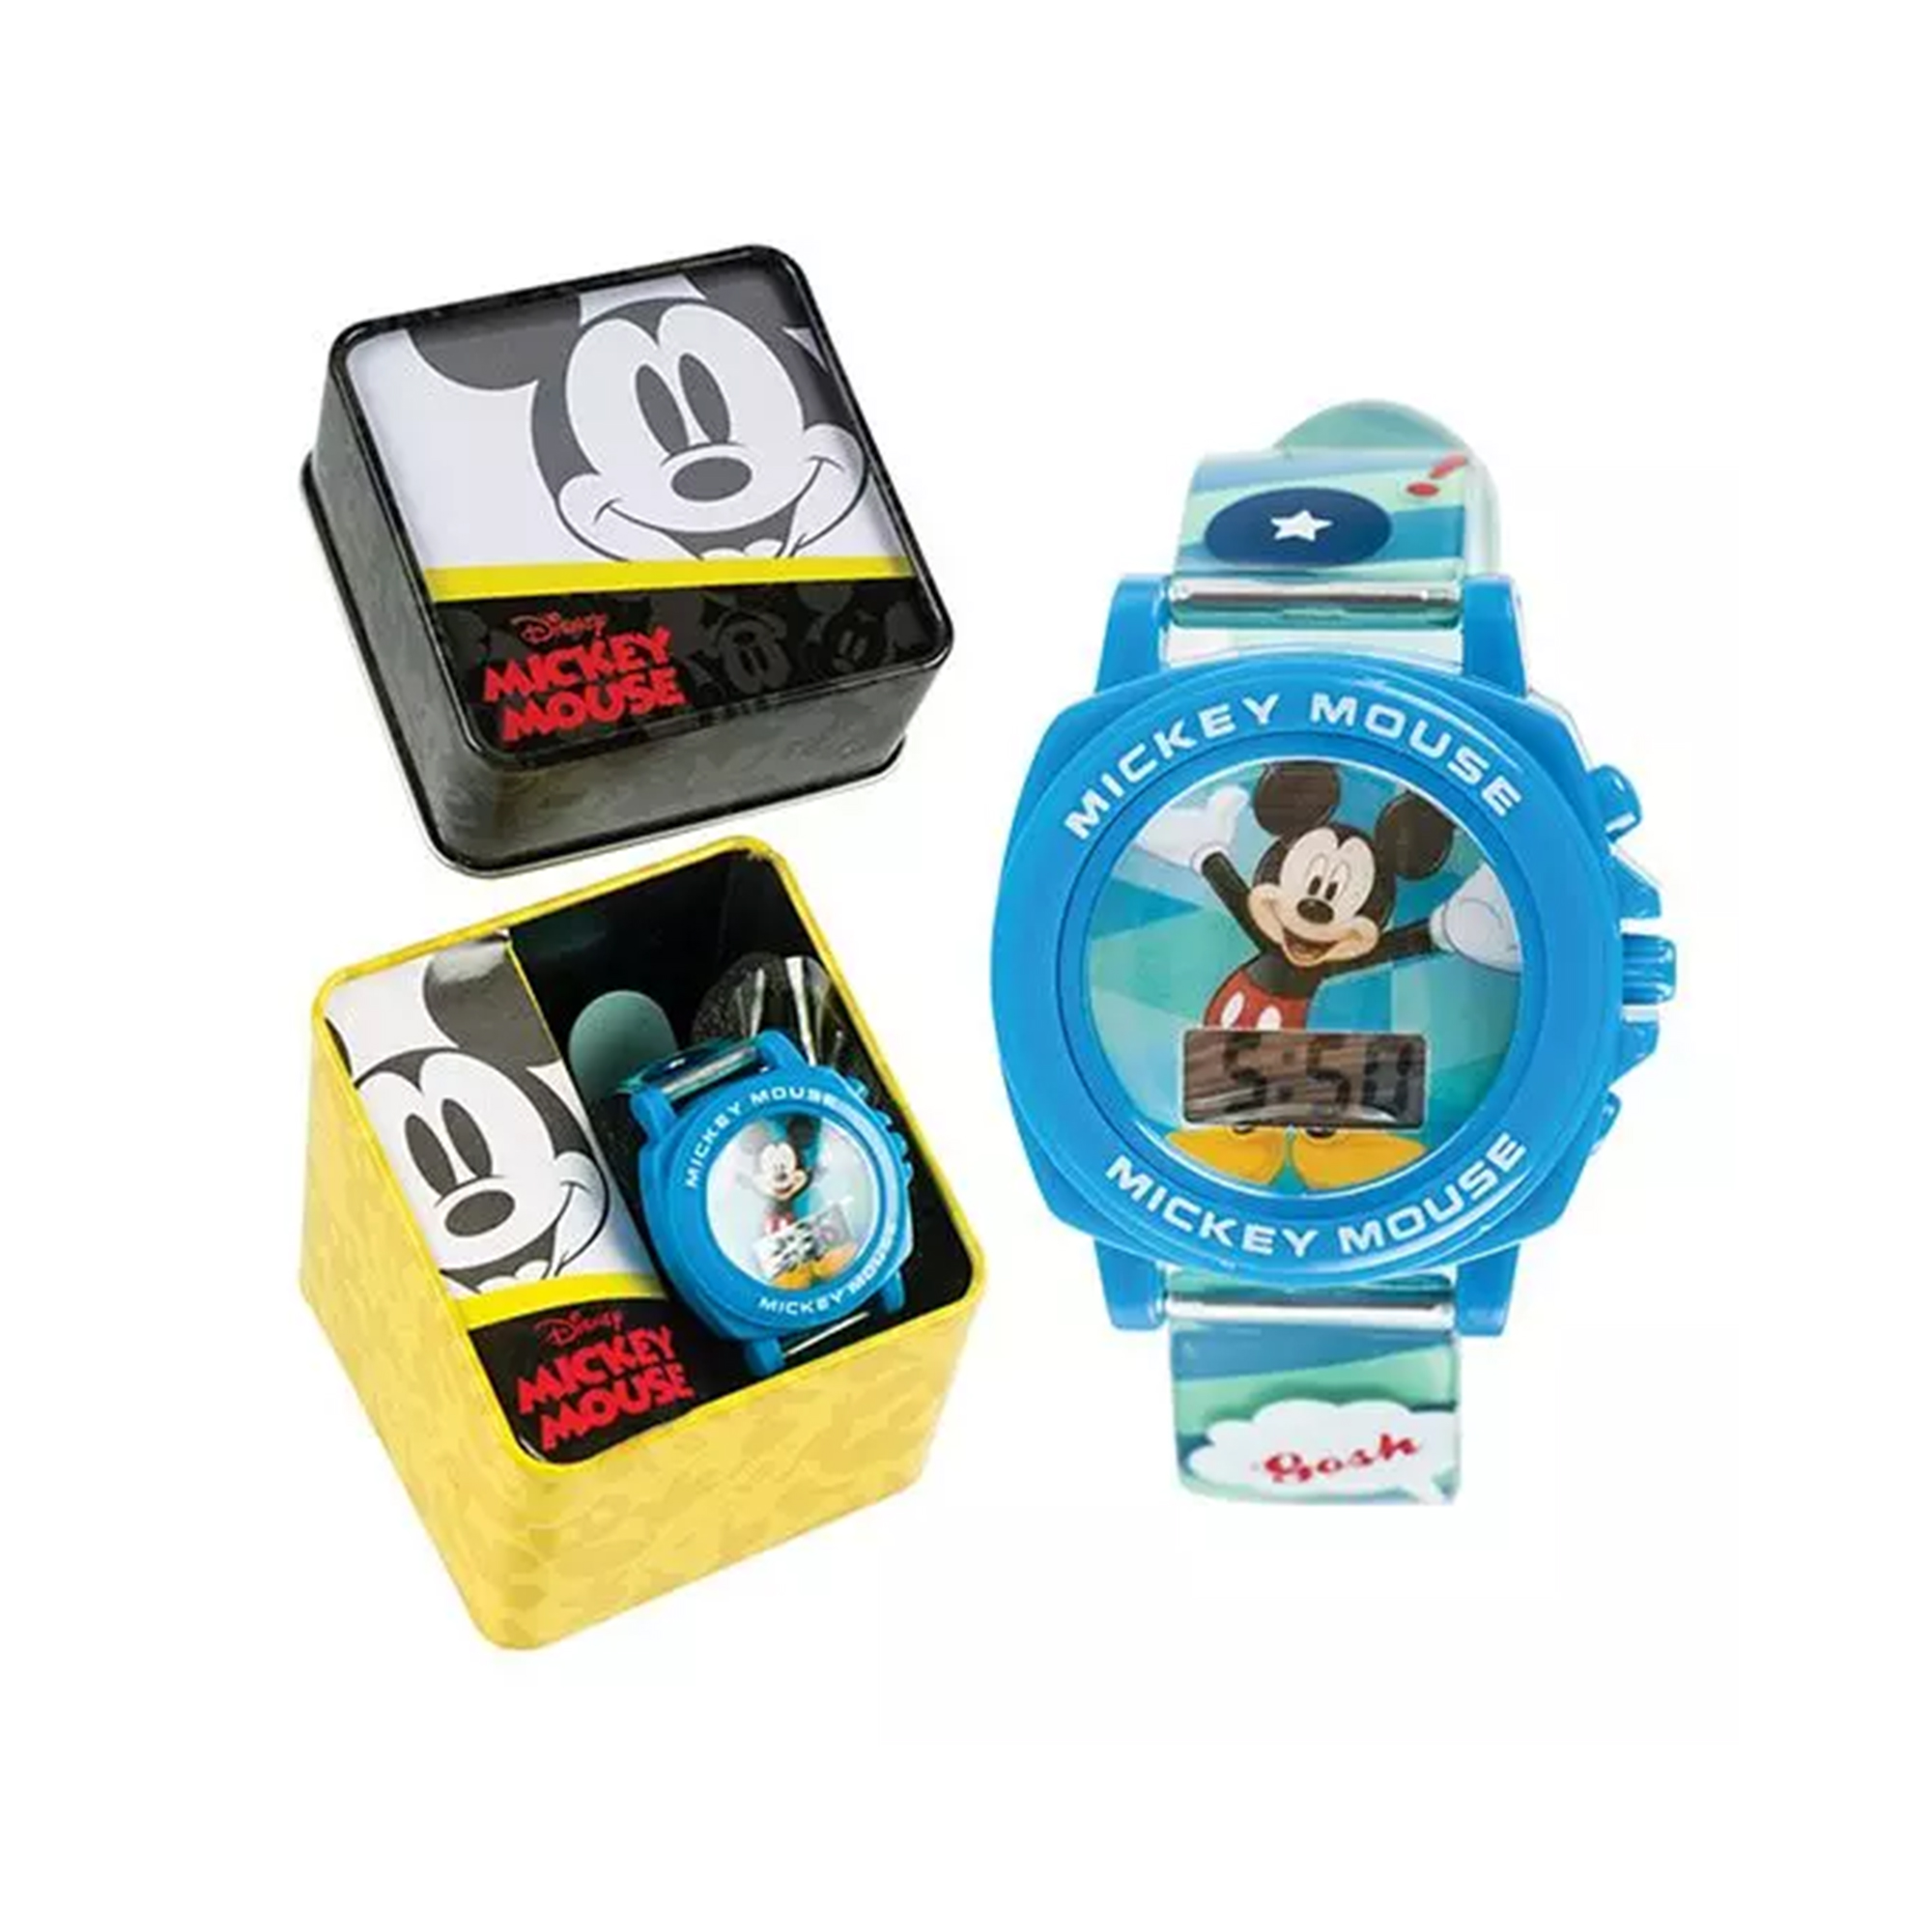 Disney Mickey Mouse LCD Watch in Colorful Gift Case, Blue, Silicone Band, Ages 3-6